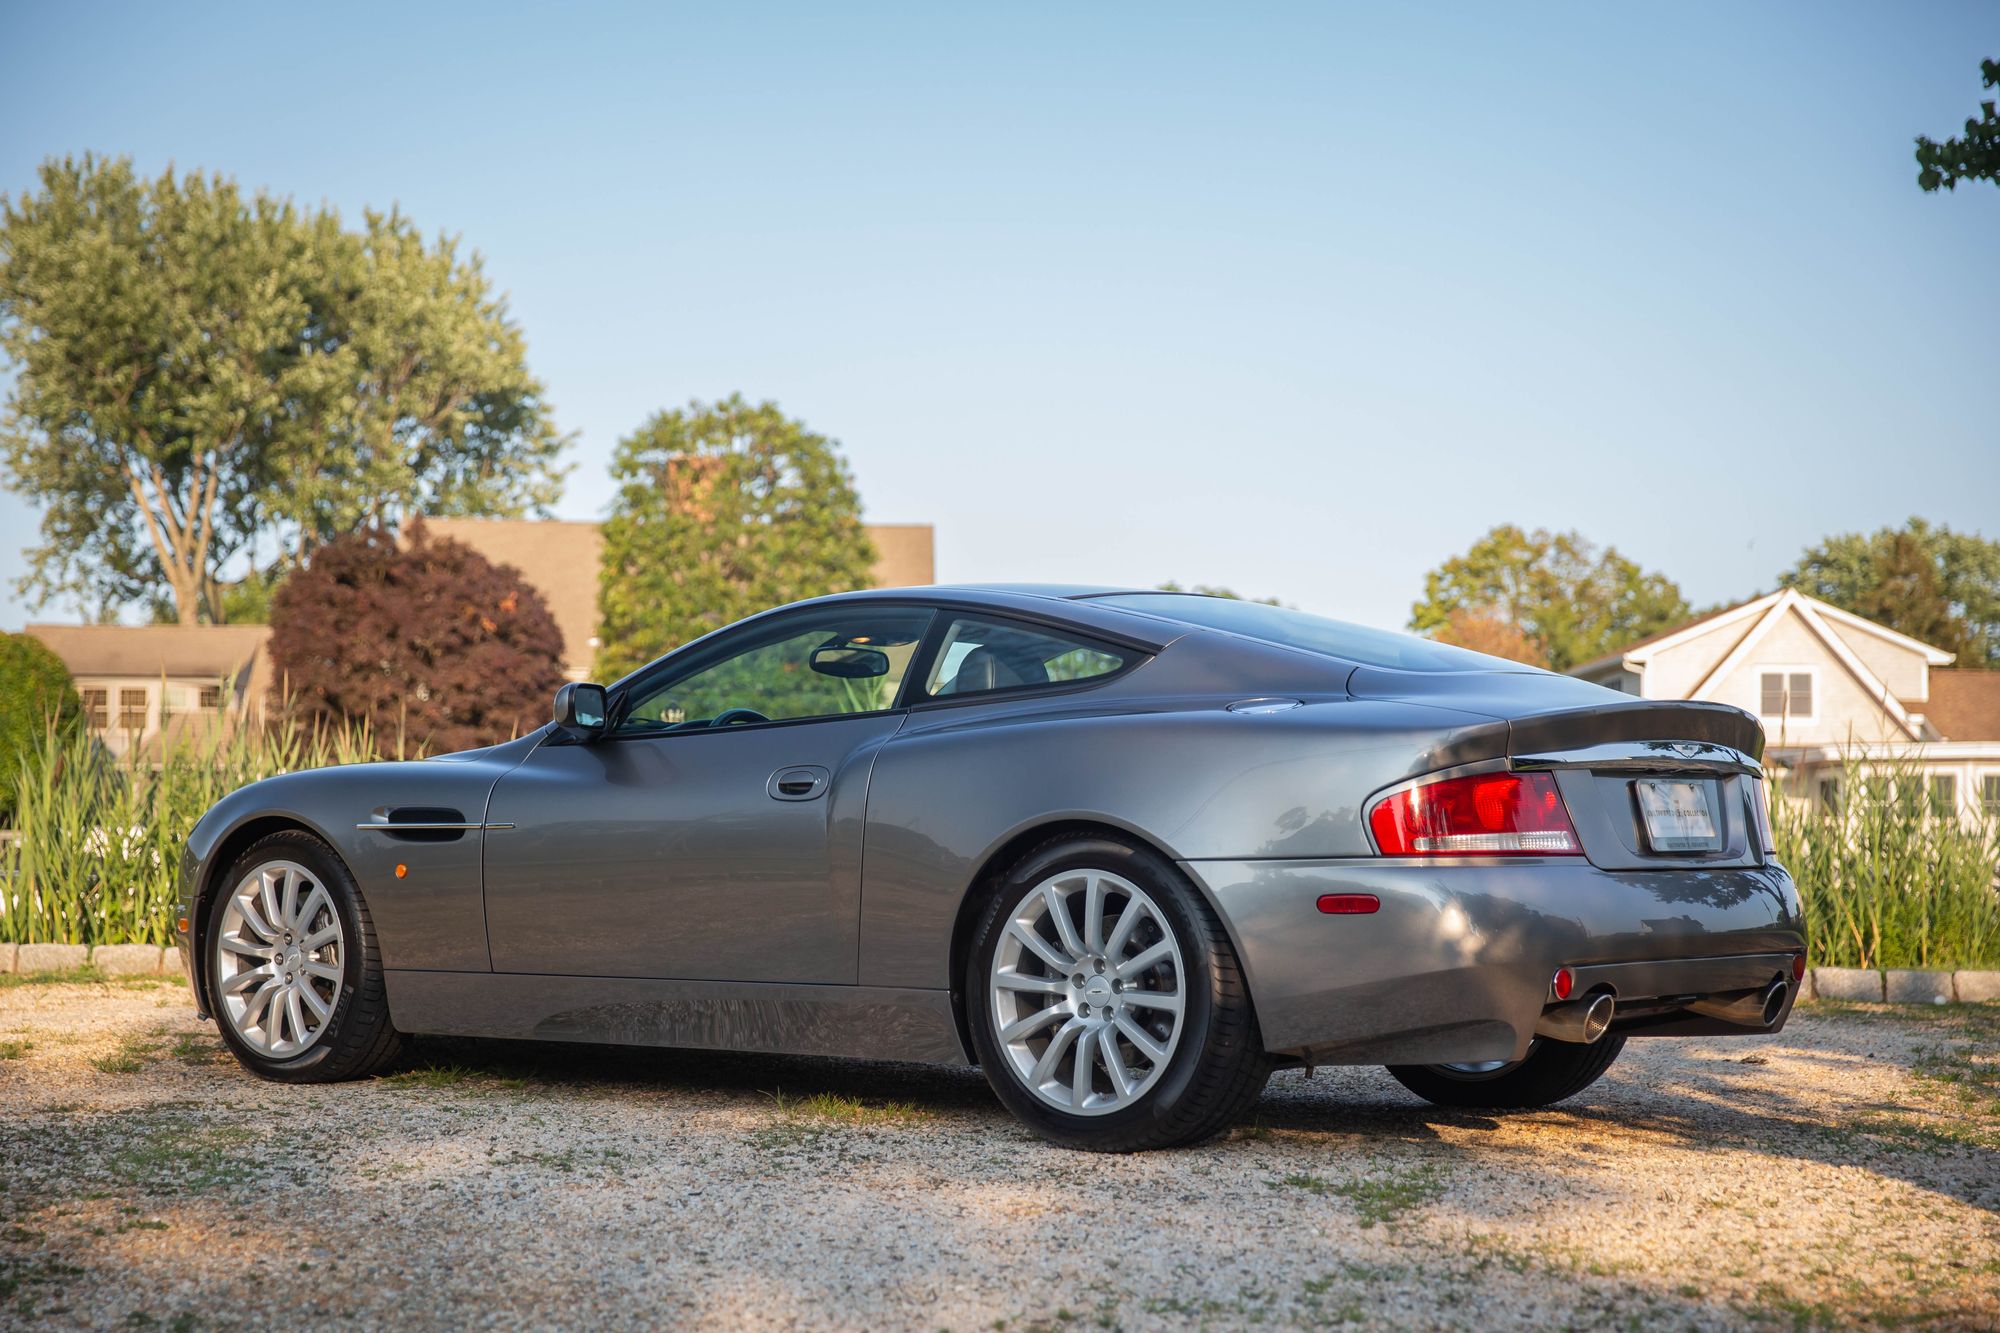 2002 Aston Martin V12 Vanquish 6-Speed Manual Previously Sold | The  Cultivated Collector